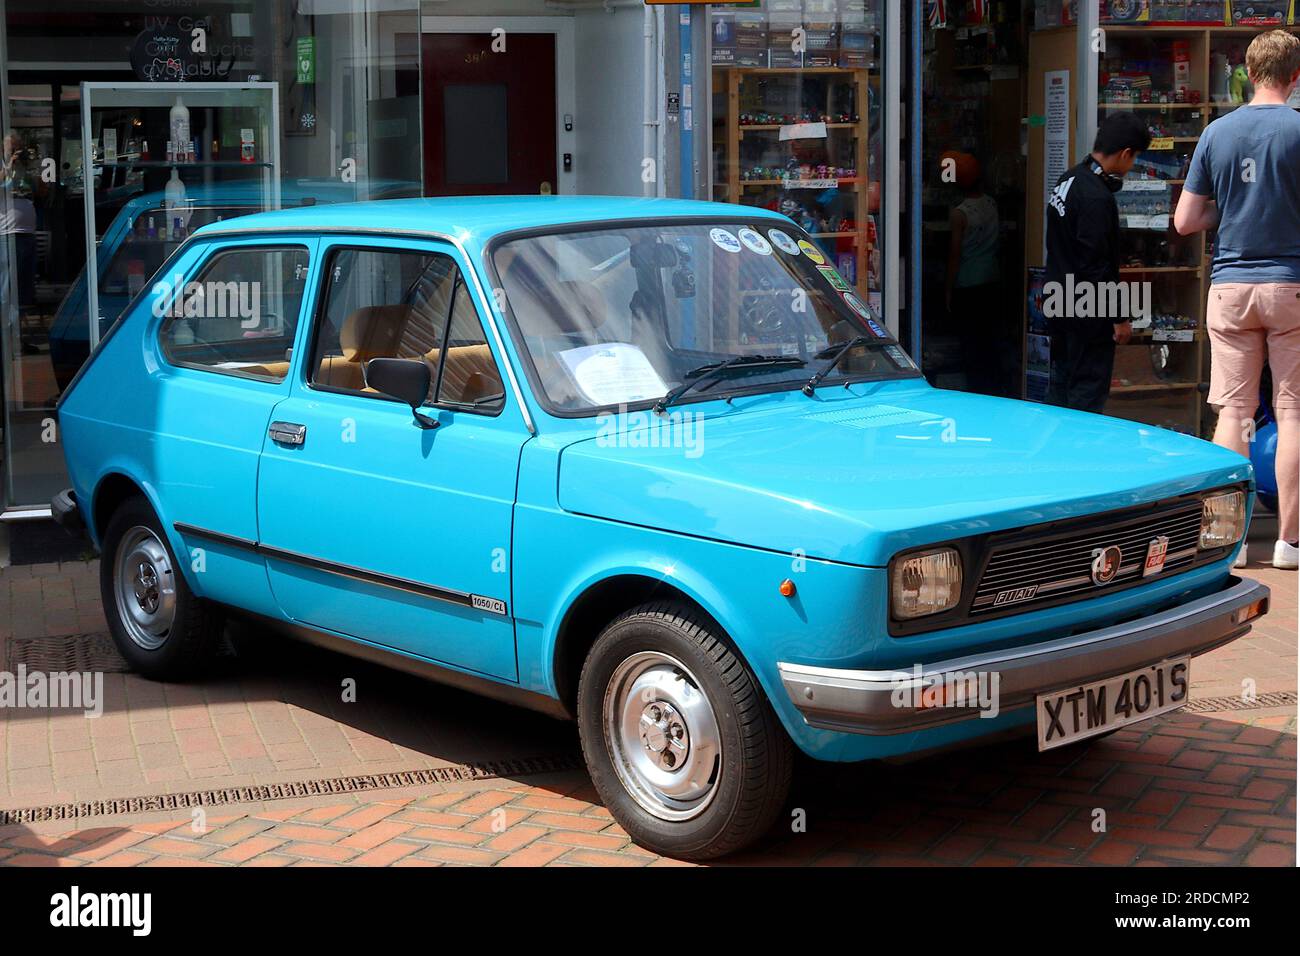 Fiat 127 Series 2, Fiat’s Supermini design of the 70’s which influenced the 3 door hatchback concept copied by the Renault 5, Ford Fiesta, VW Golf. Stock Photo